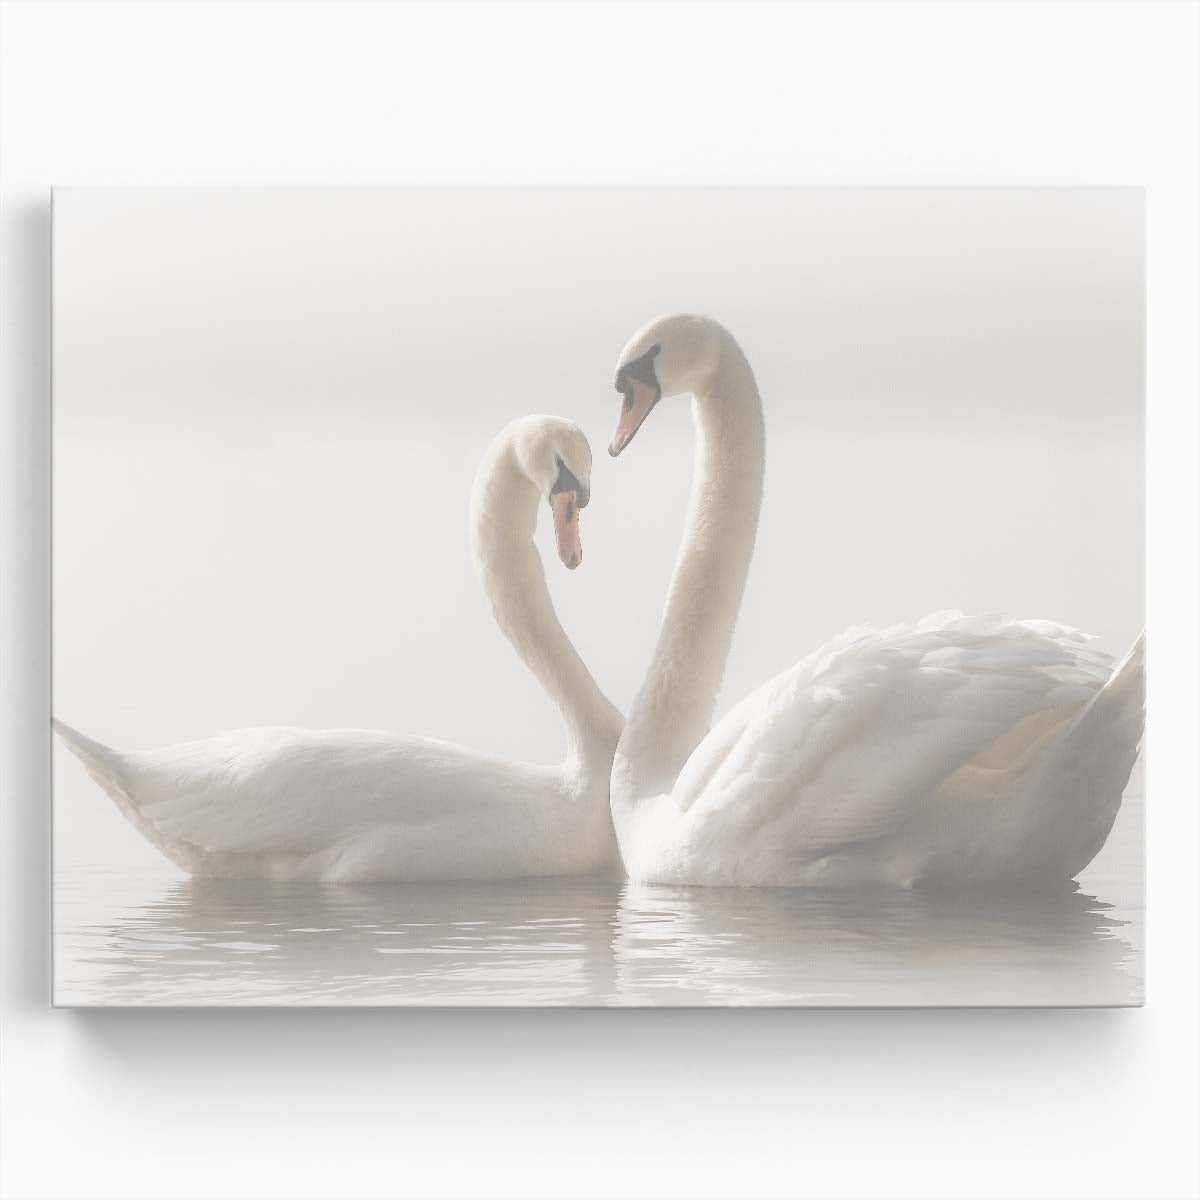 Romantic Misty Swan Couple in Tranquil German Waters Wall Art by Luxuriance Designs. Made in USA.